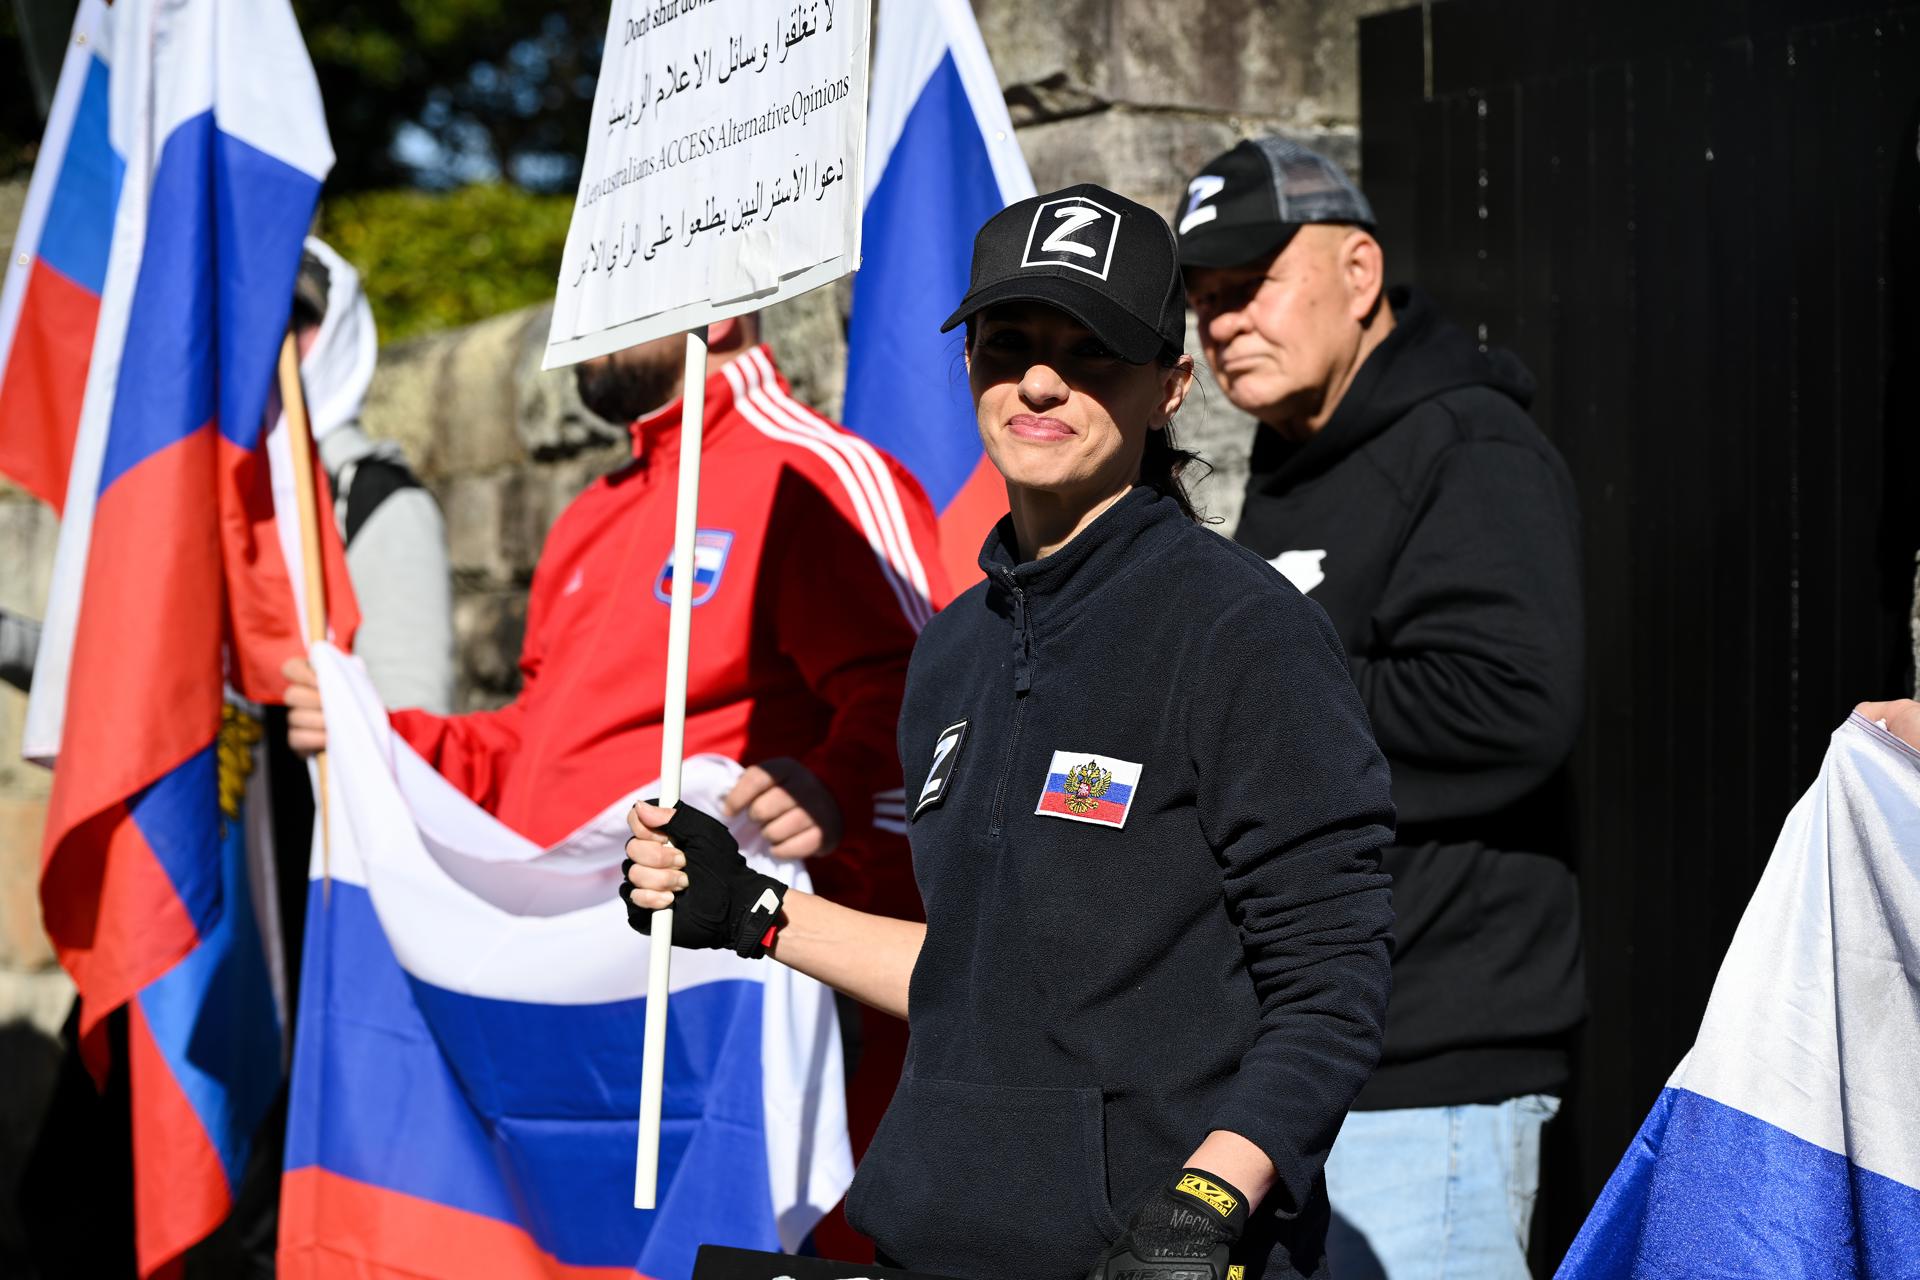 People participate in a pro-Russian protest at Kirribilli House in Sydney, Australia, 24 June 2023. EFE-EPA/STEVEN MARKHAM AUSTRALIA AND NEW ZEALAND OUT
